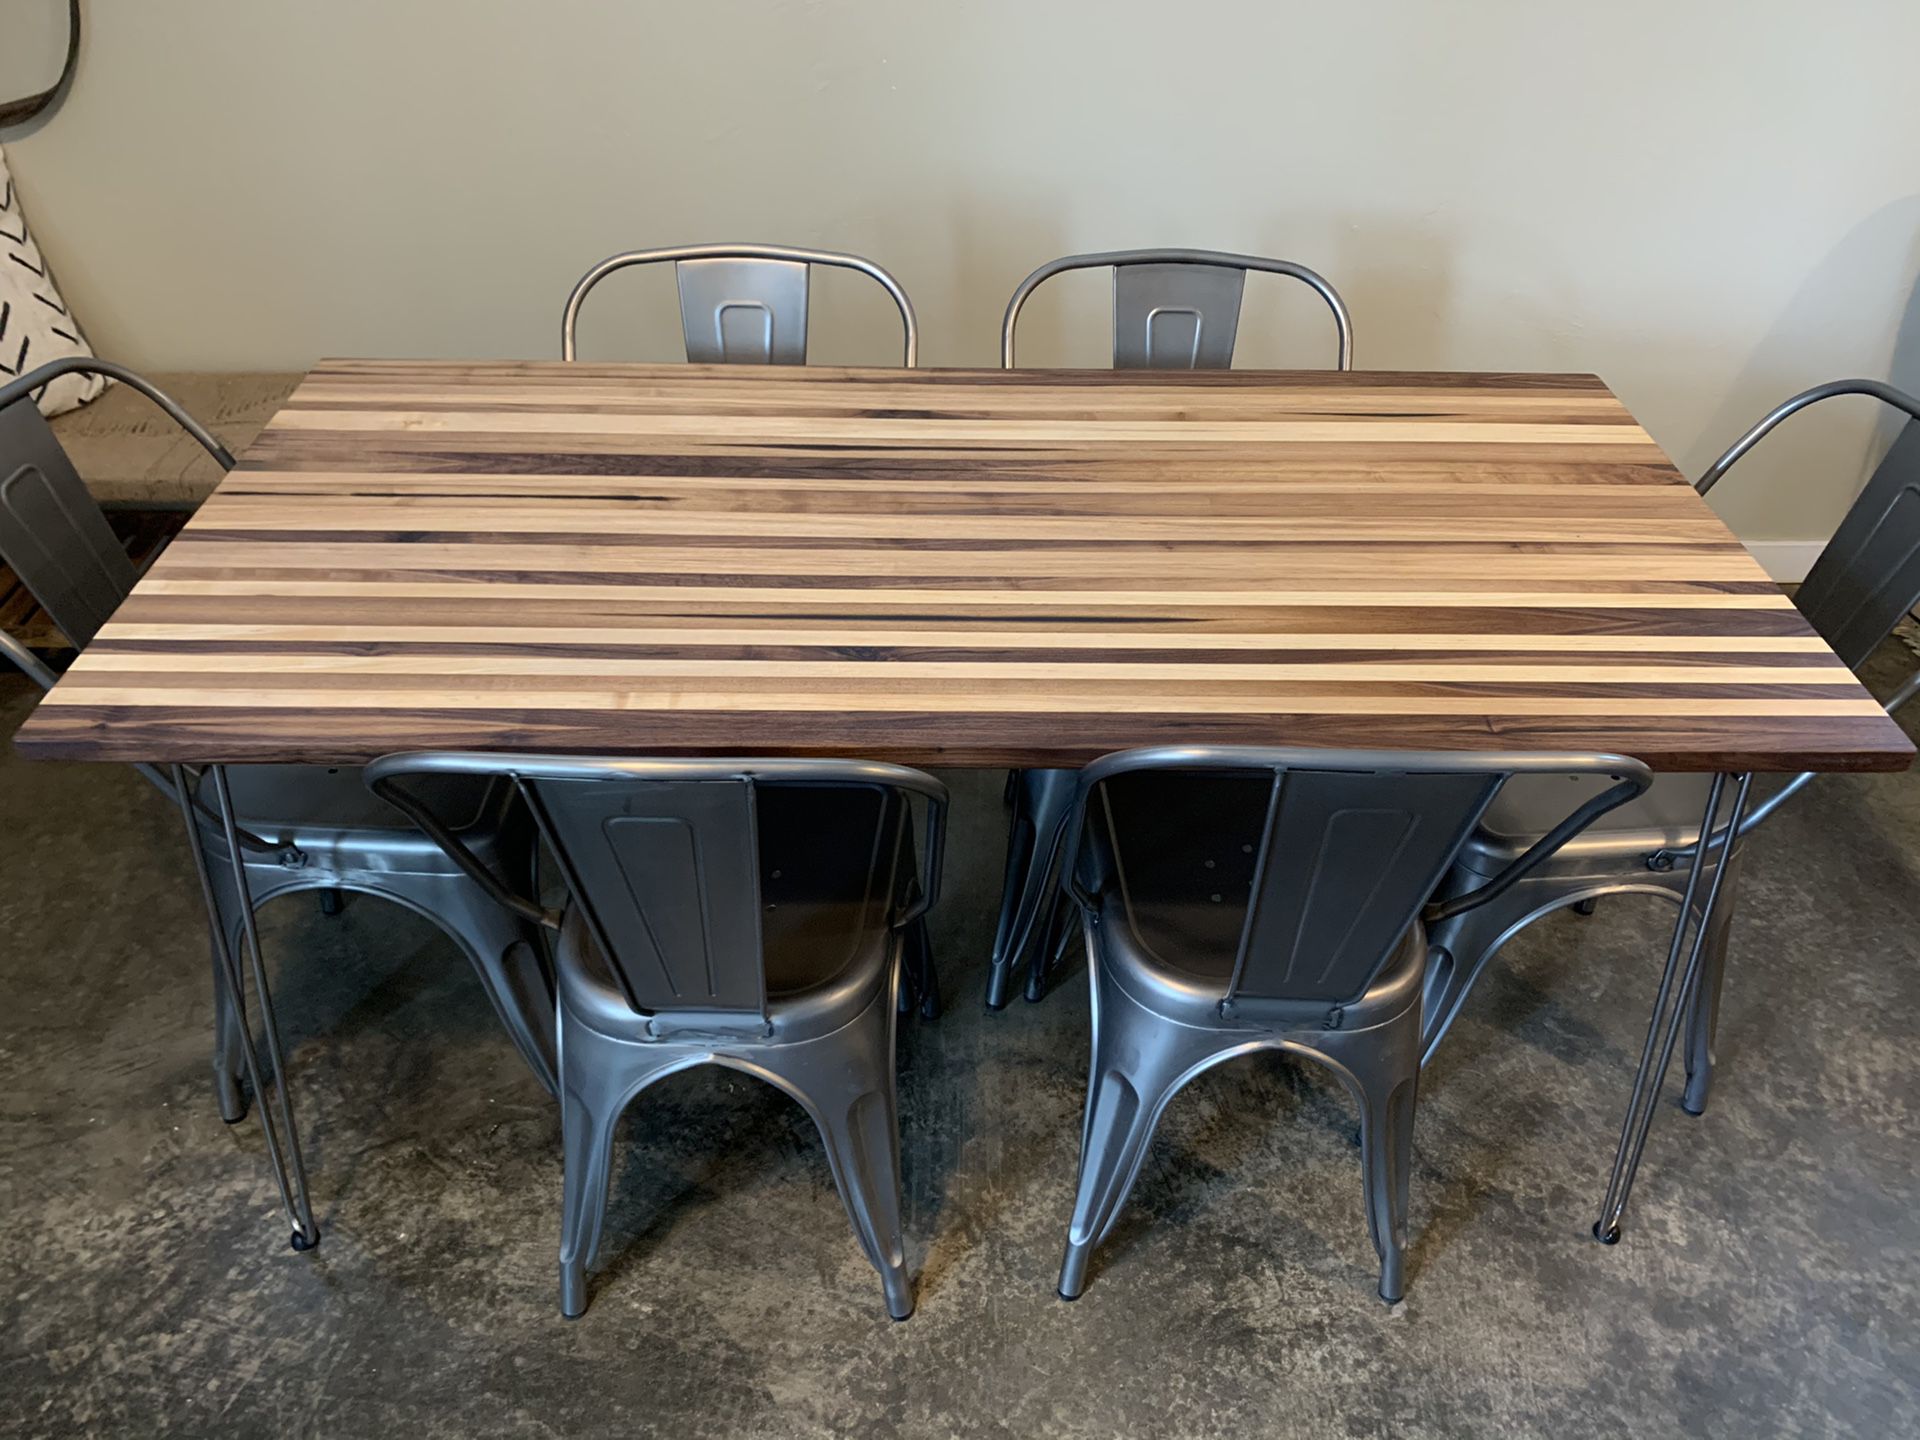 Butcher block style dining table